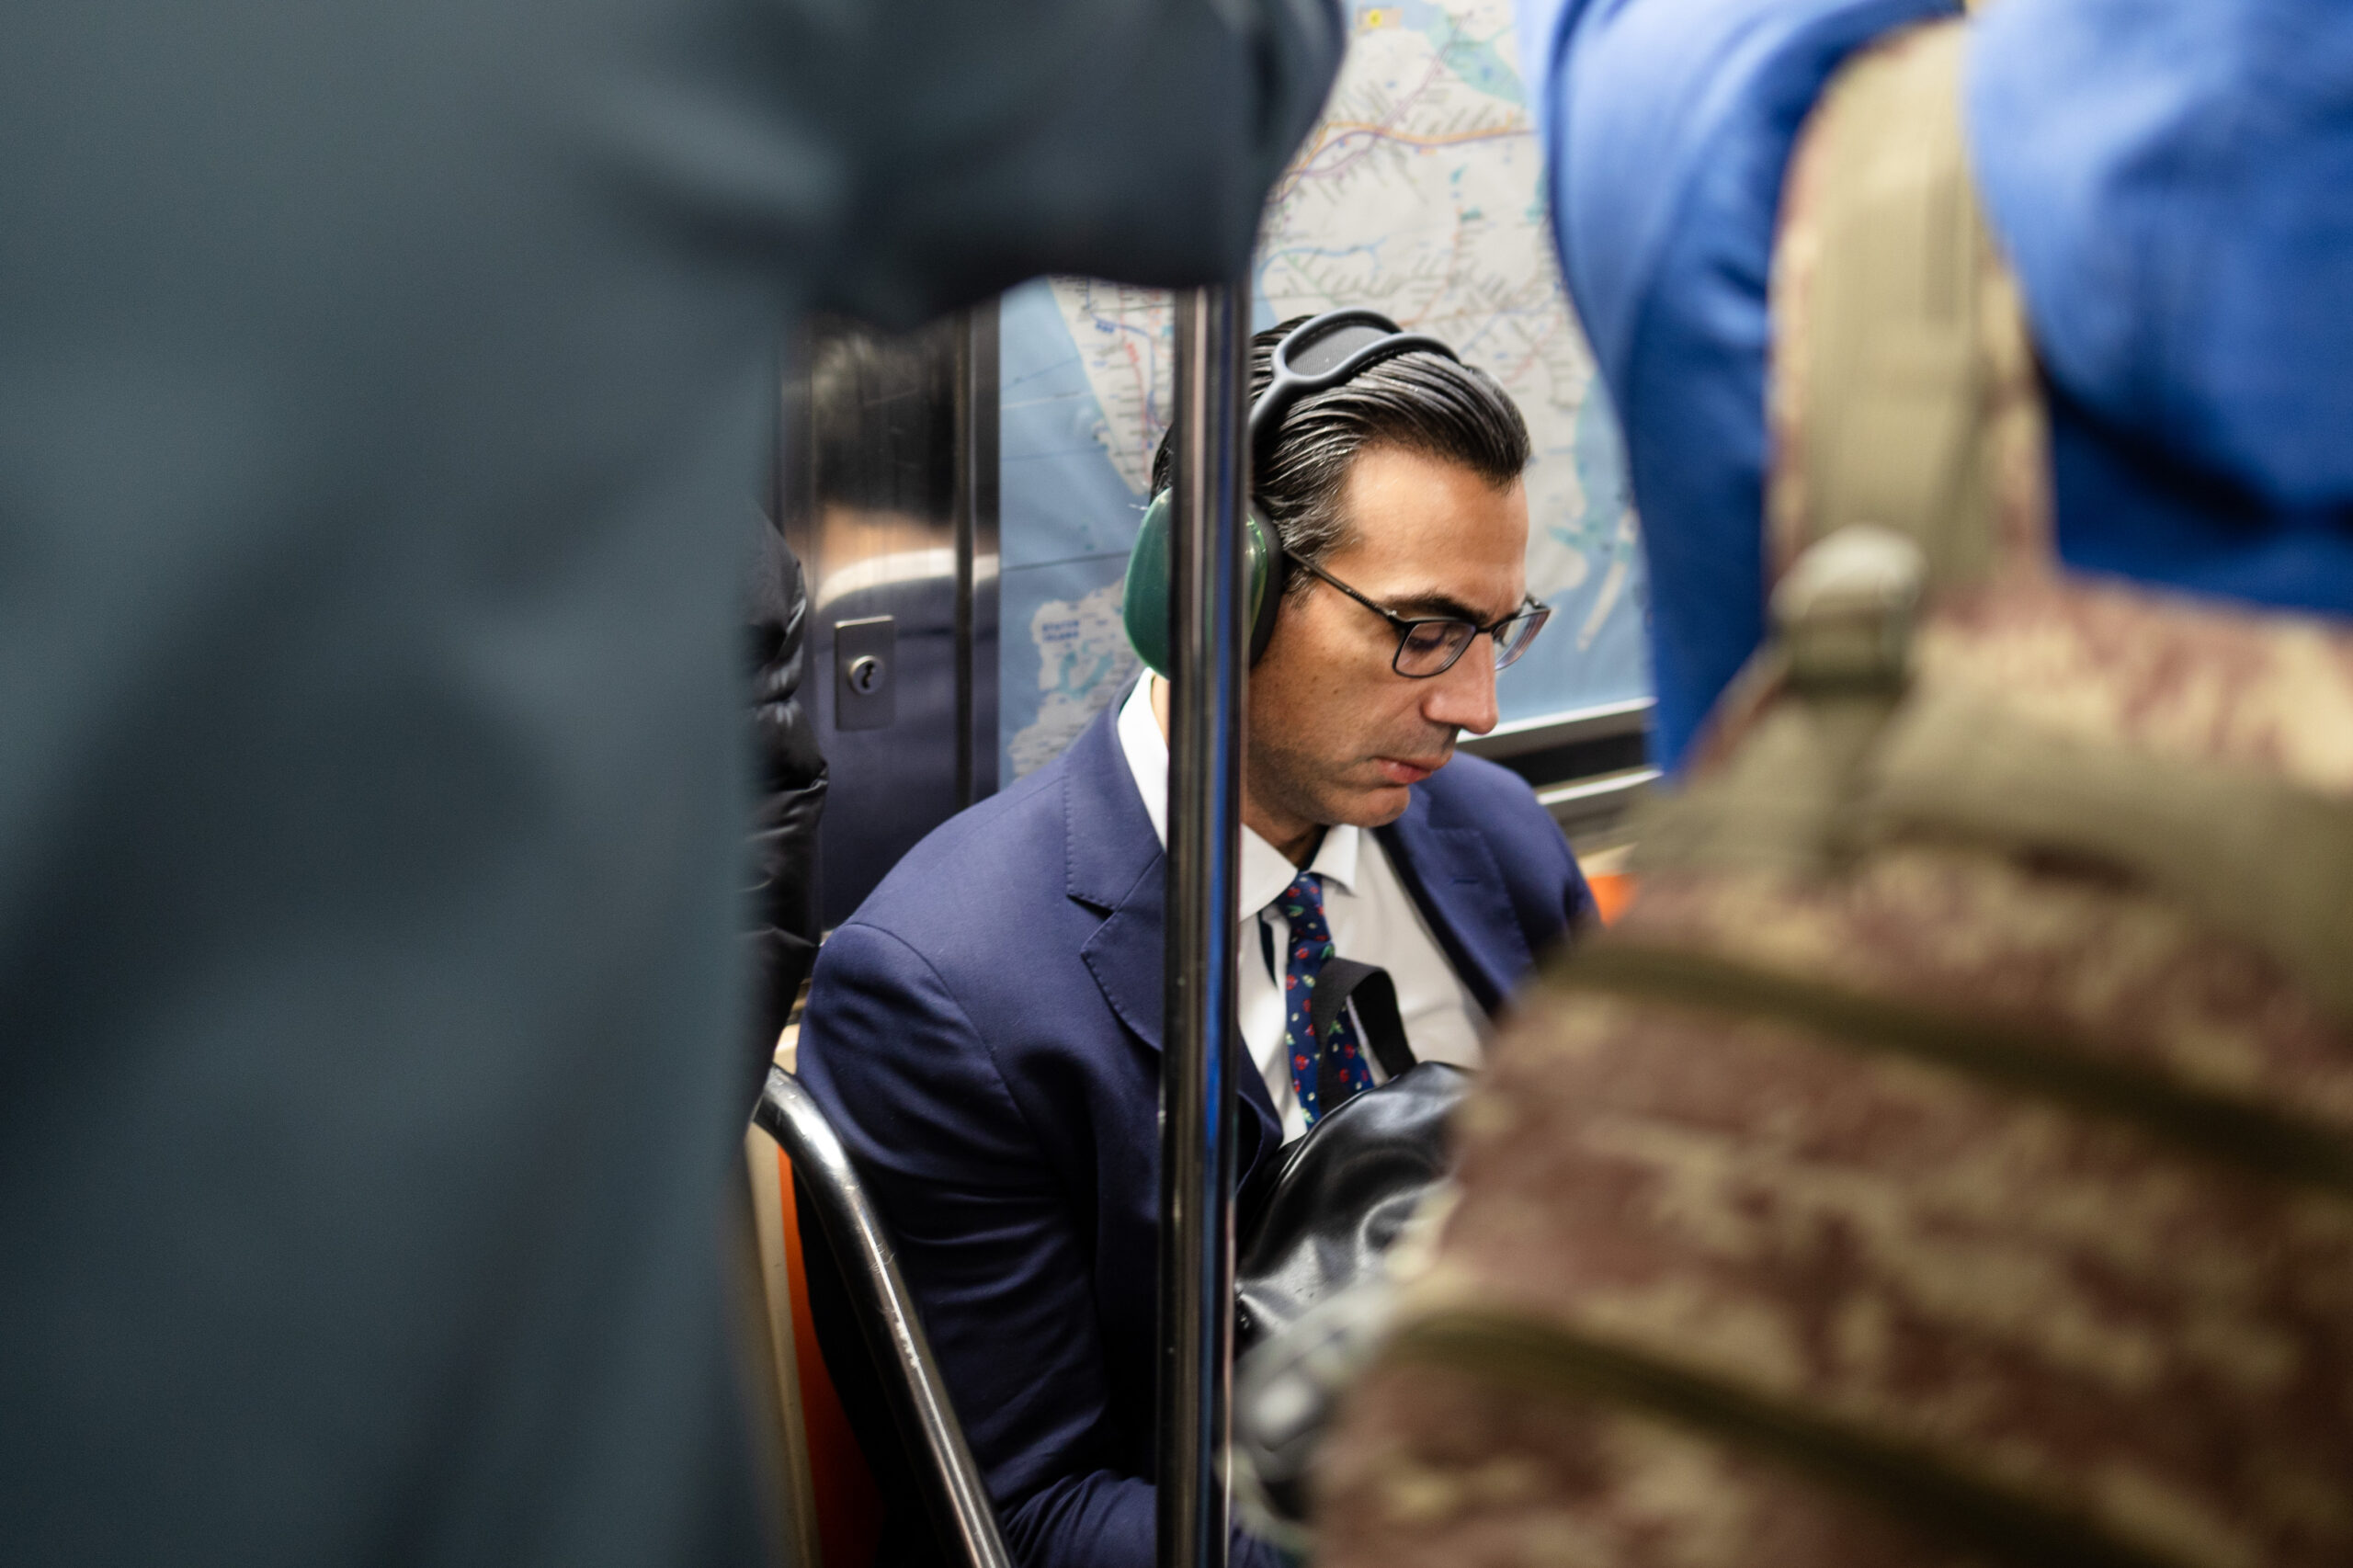 A man in a blue suit and tie is seated in a crowded subway car looking down at something in his hand which is blocked by a green backpack. He is framed by the backs of people standing in the foreground, both also in various shades of blue. His hair is jet black and slicked back. He is wearing a pair of green headphones and glasses. Behind him is a blue map which contrasts with the hint of orange on either side of him.